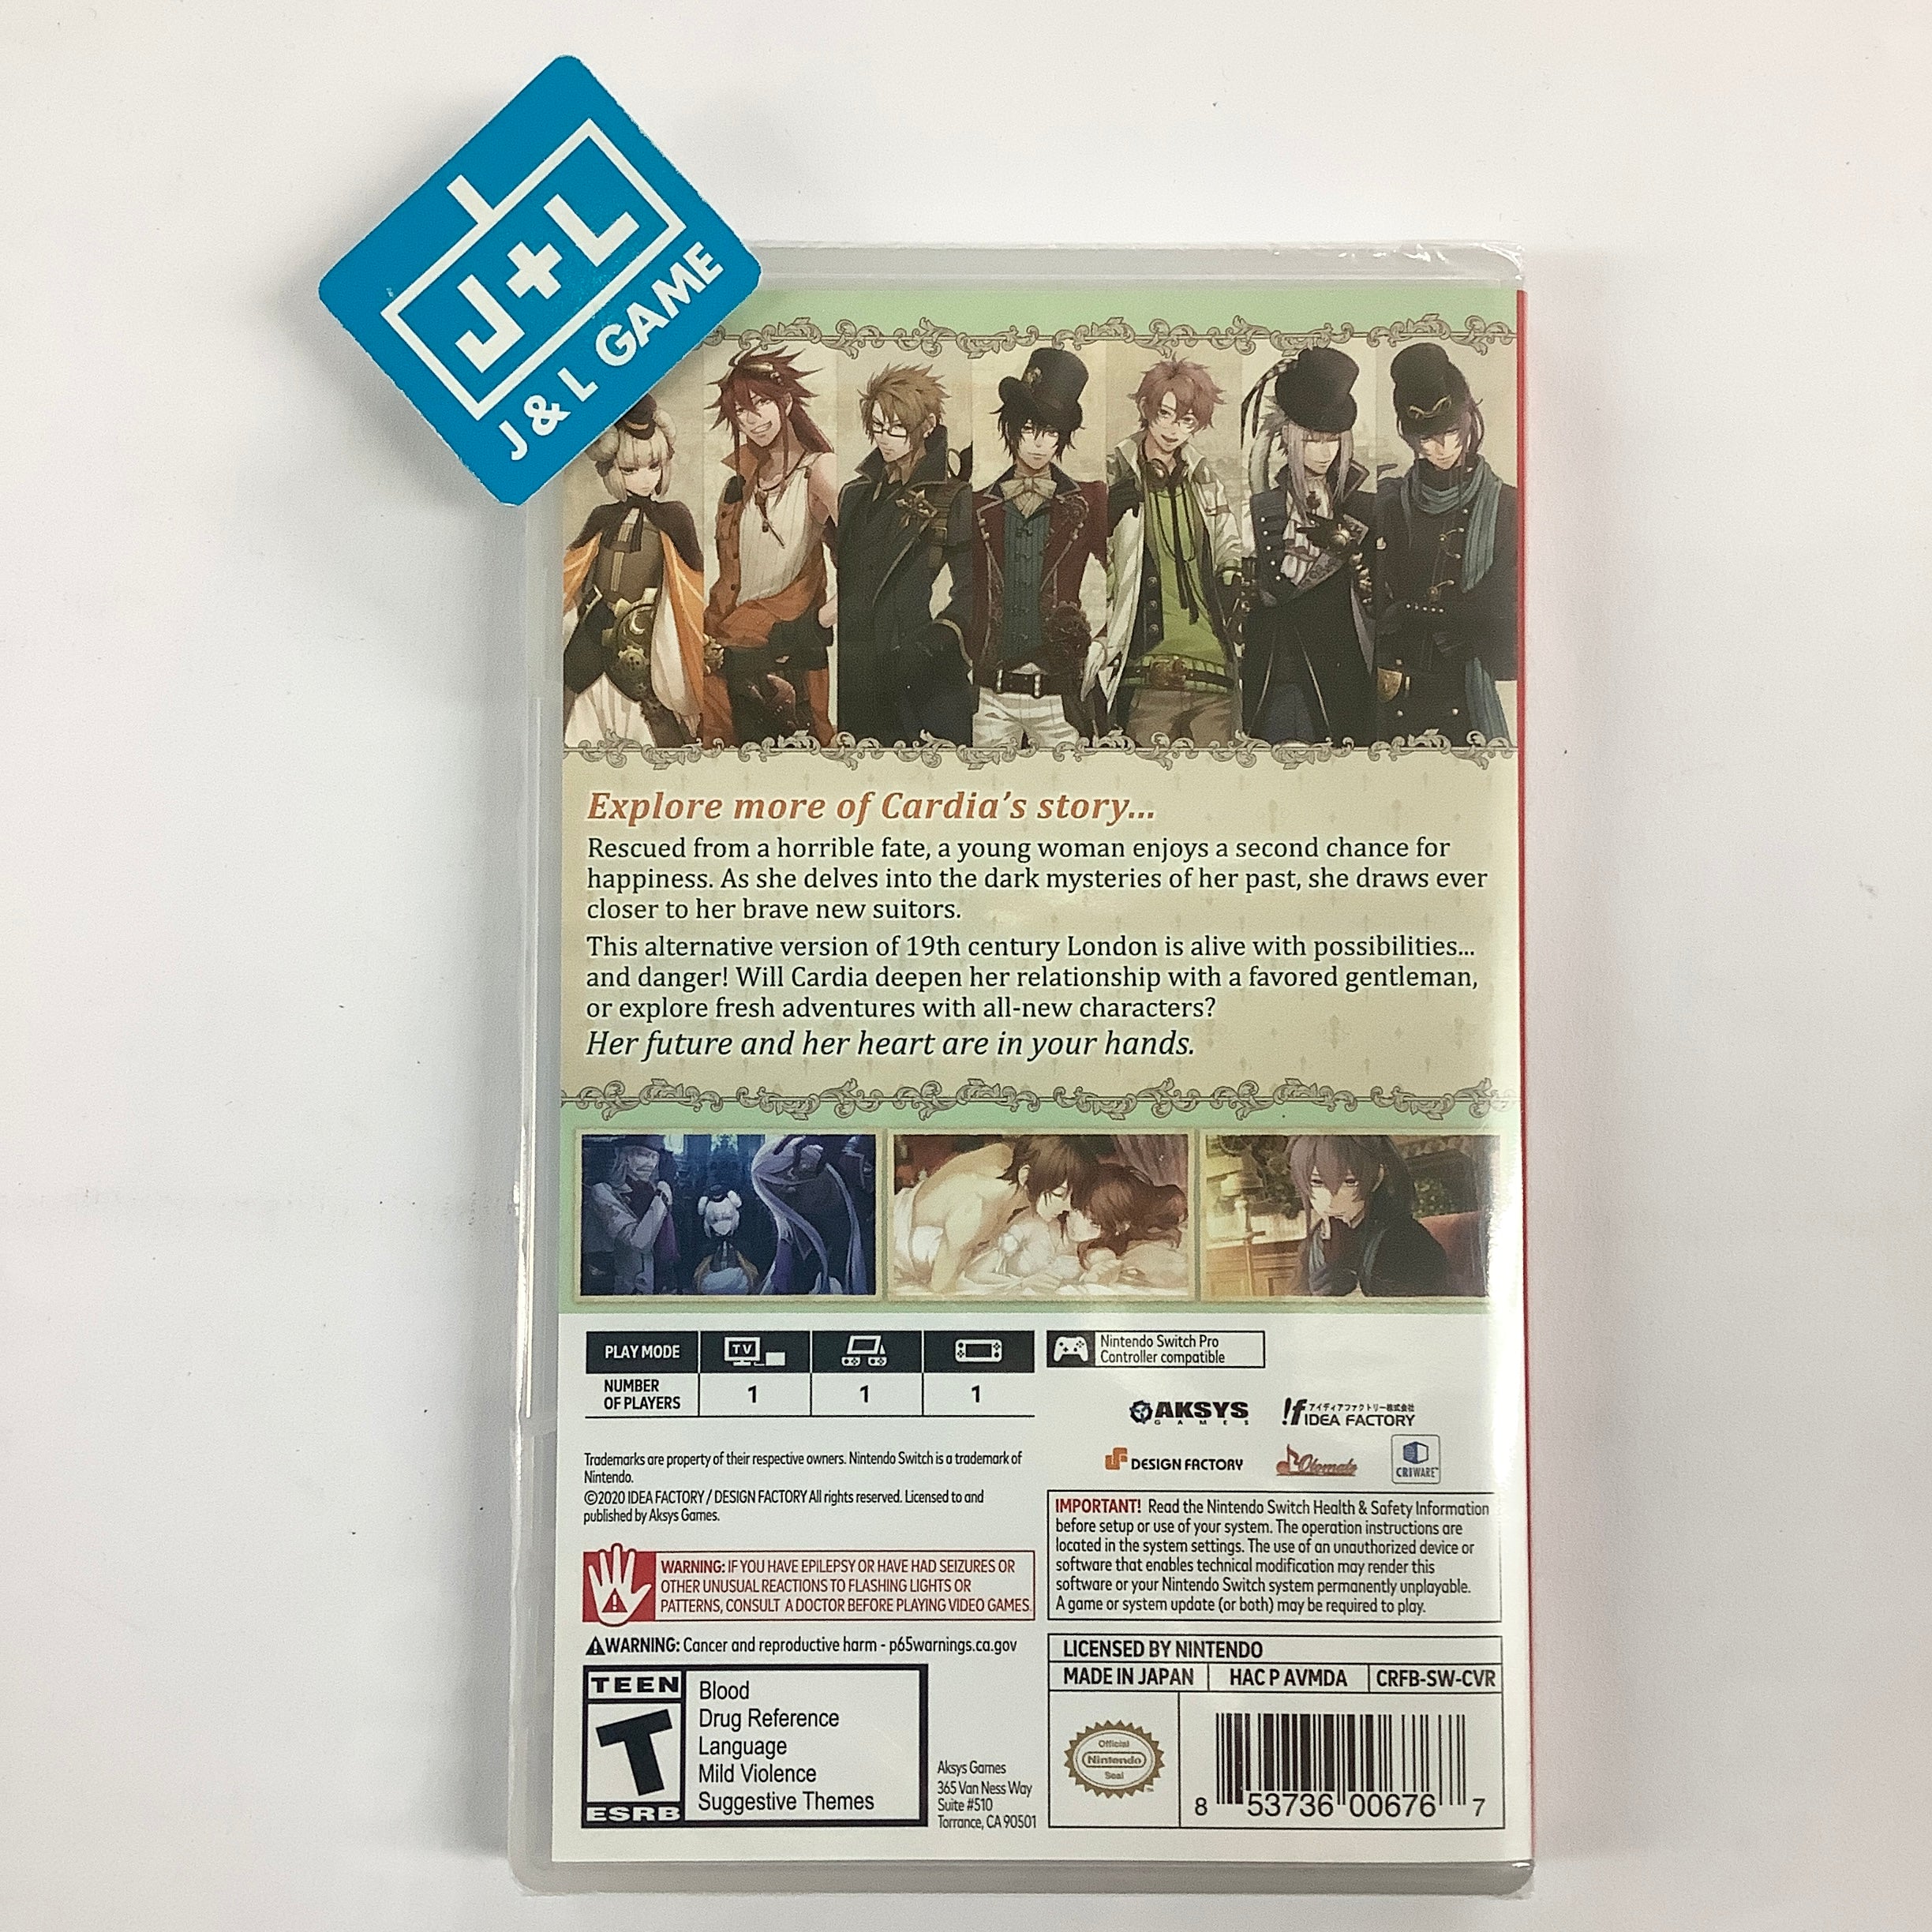 Code: Realize ~Future Blessings~ - Nintendo Switch Video Games Aksys Games   